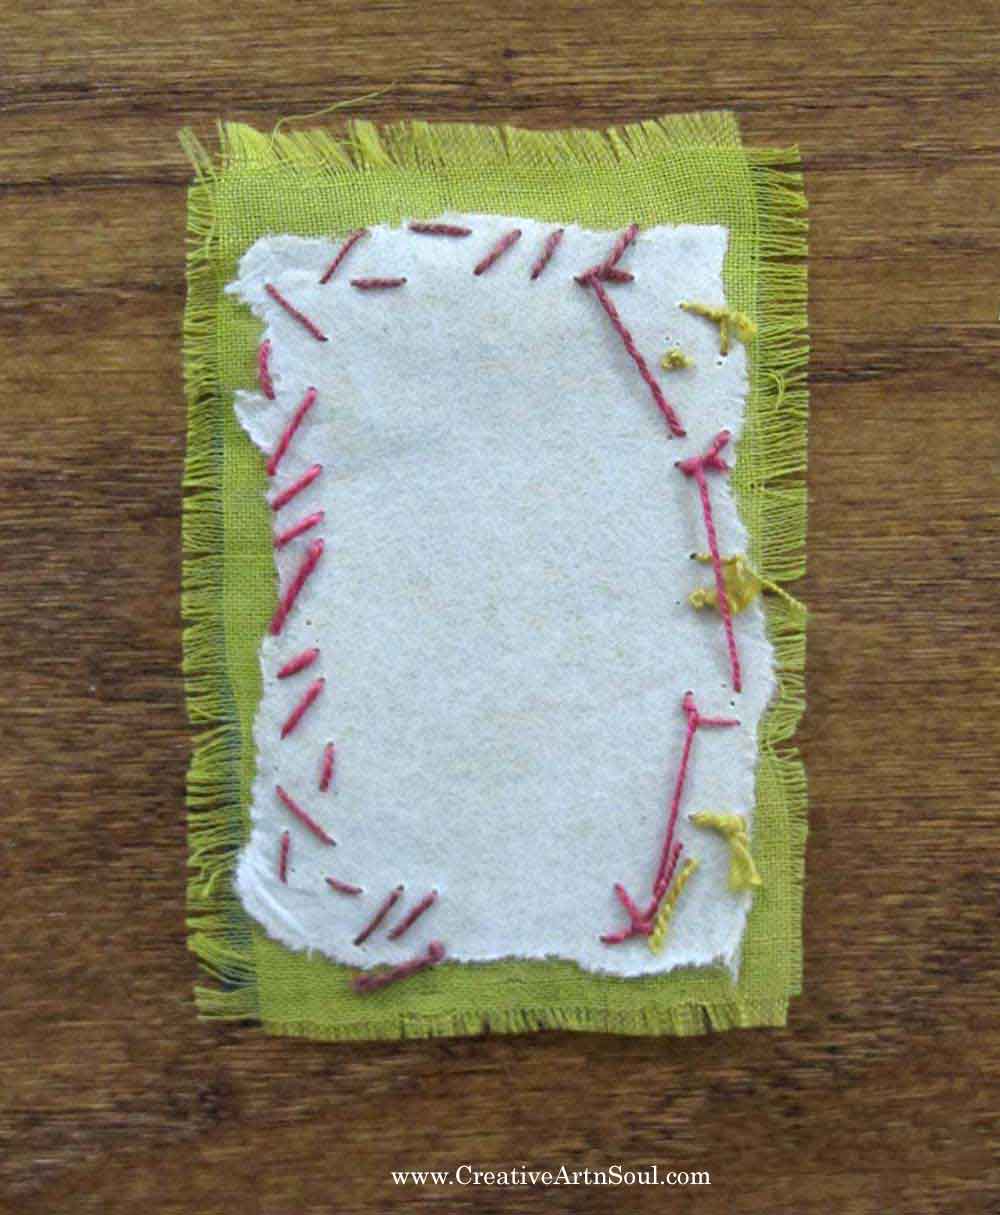 Make Your Own Stitched Mixed Media Mini-Journal